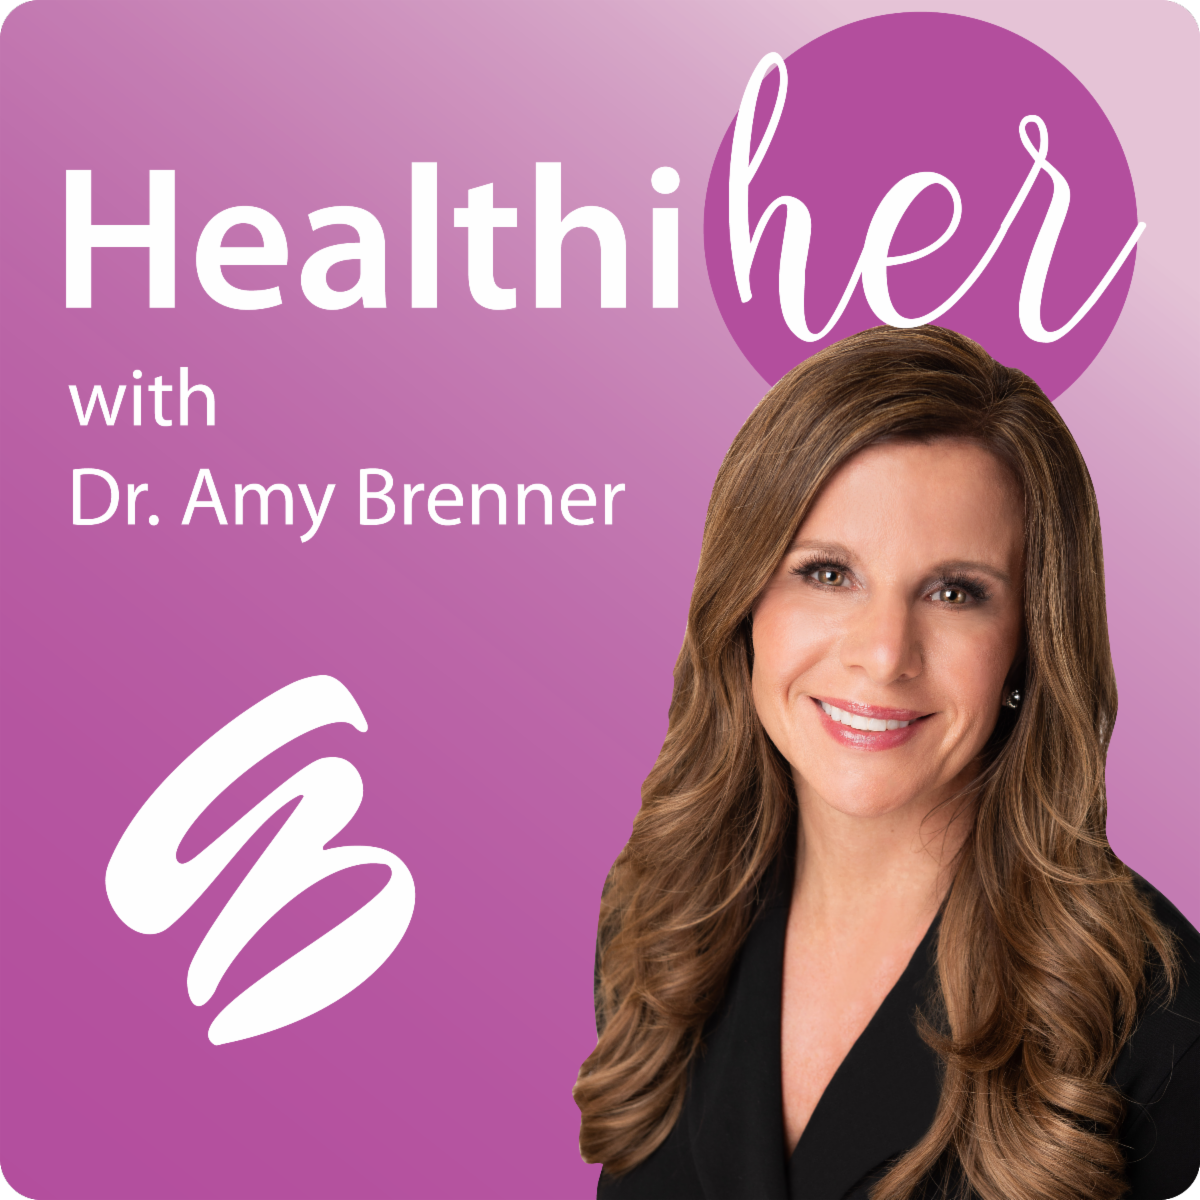 Healthiher podcast